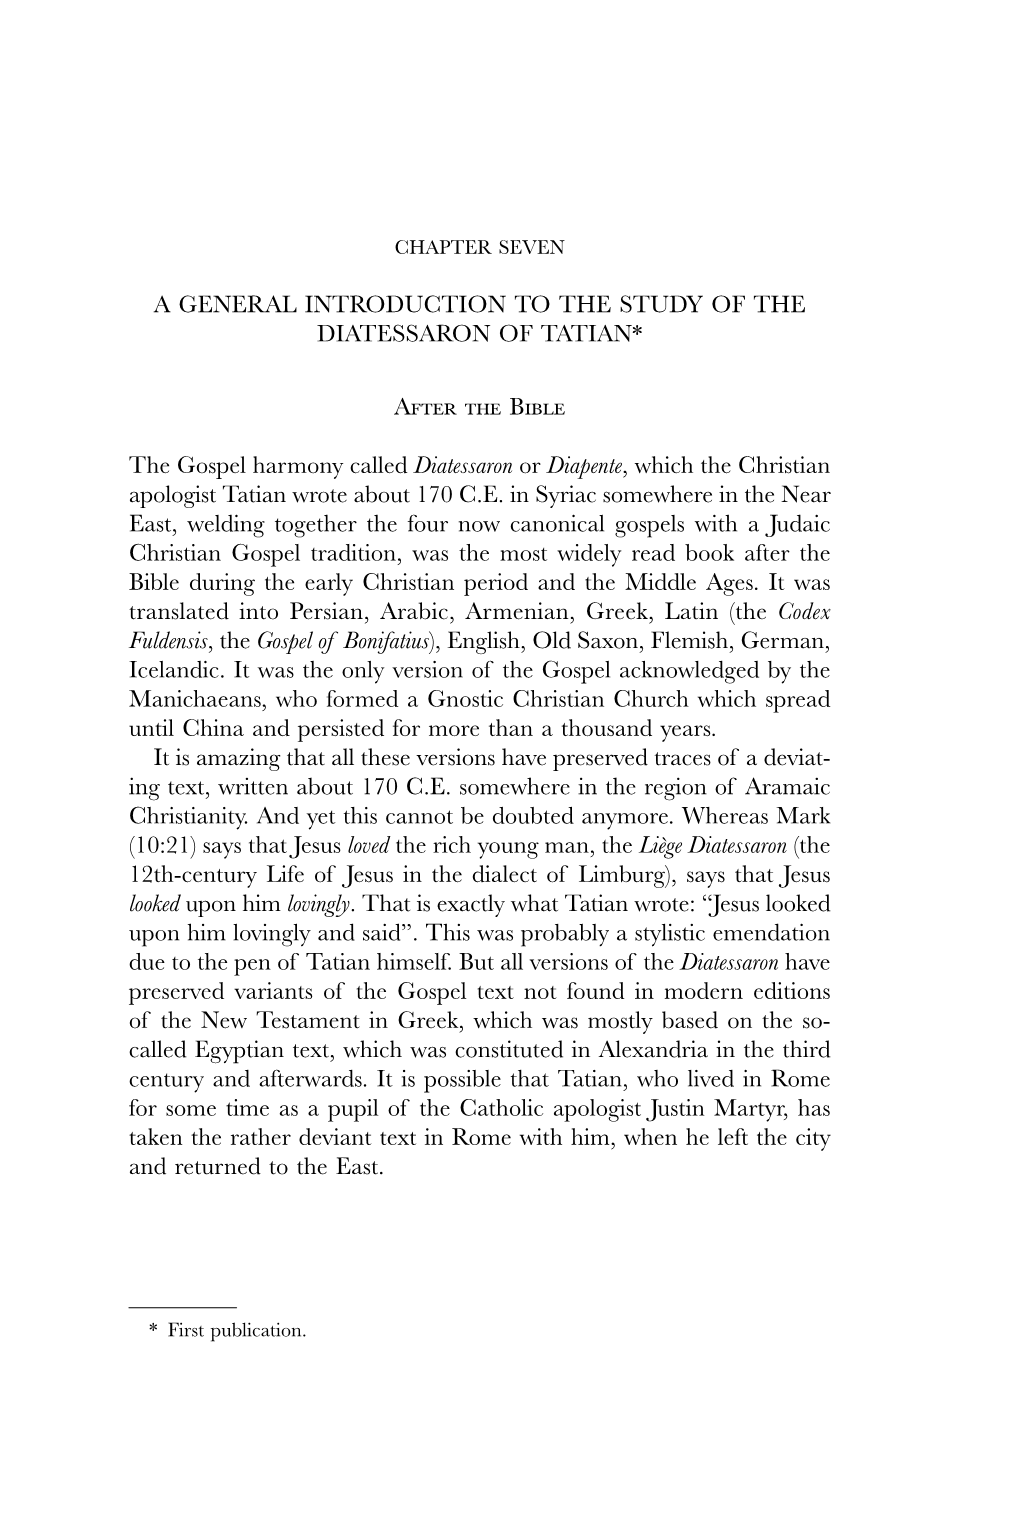 A General Introduction to the Study of the Diatessaron of Tatian*